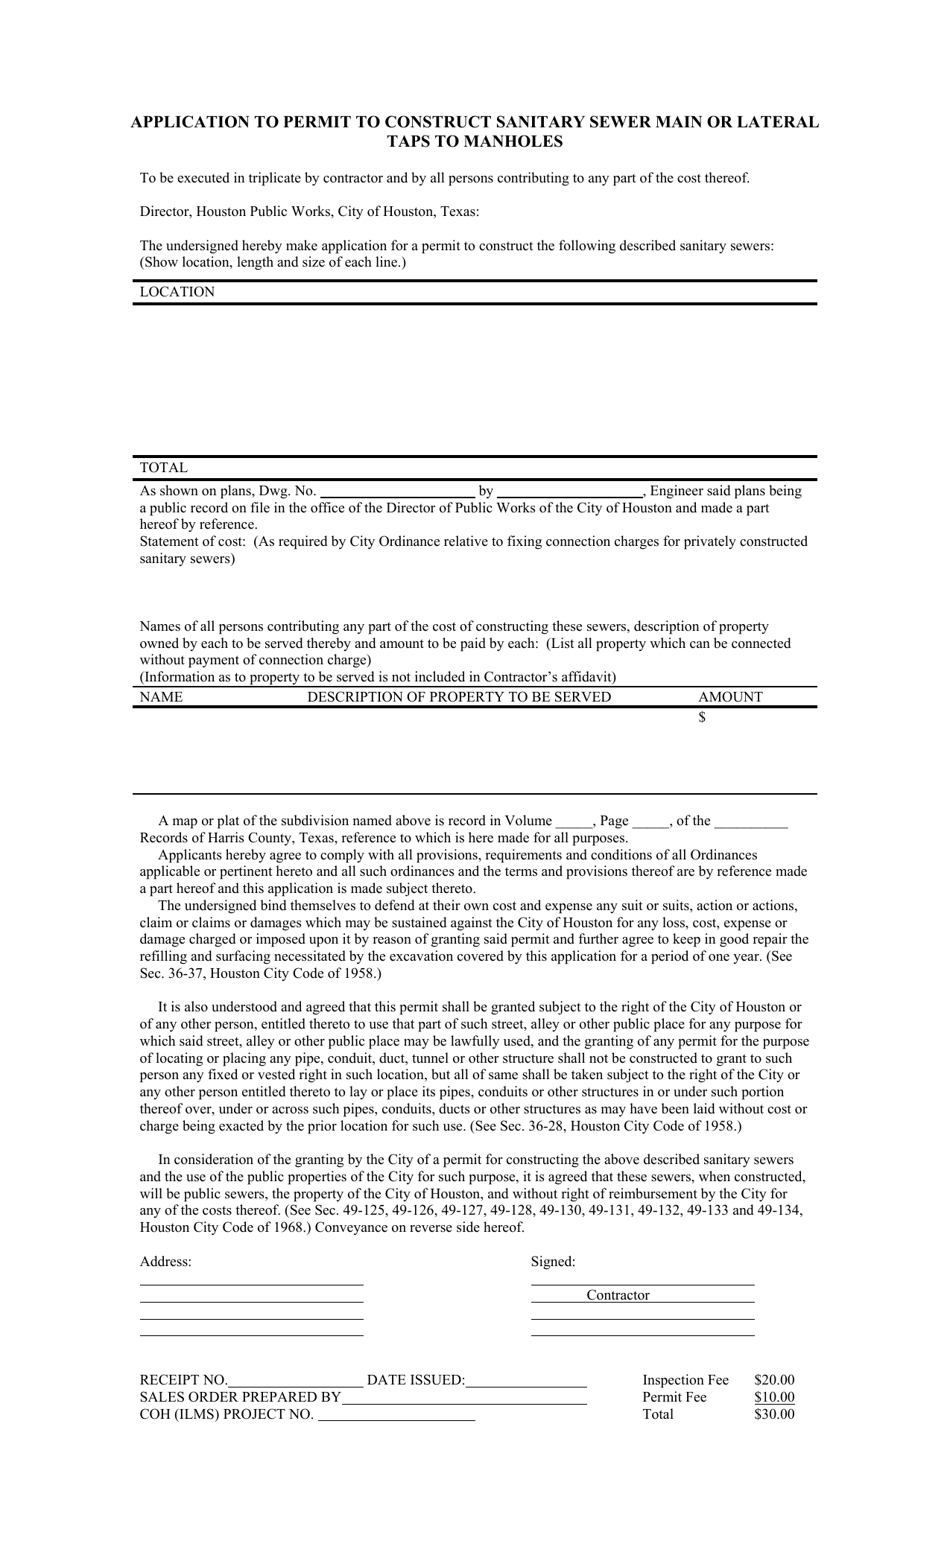 Application to Permit to Construct Sanitary Sewer Main or Lateral Taps to Manholes - City of Houston, Texas, Page 1